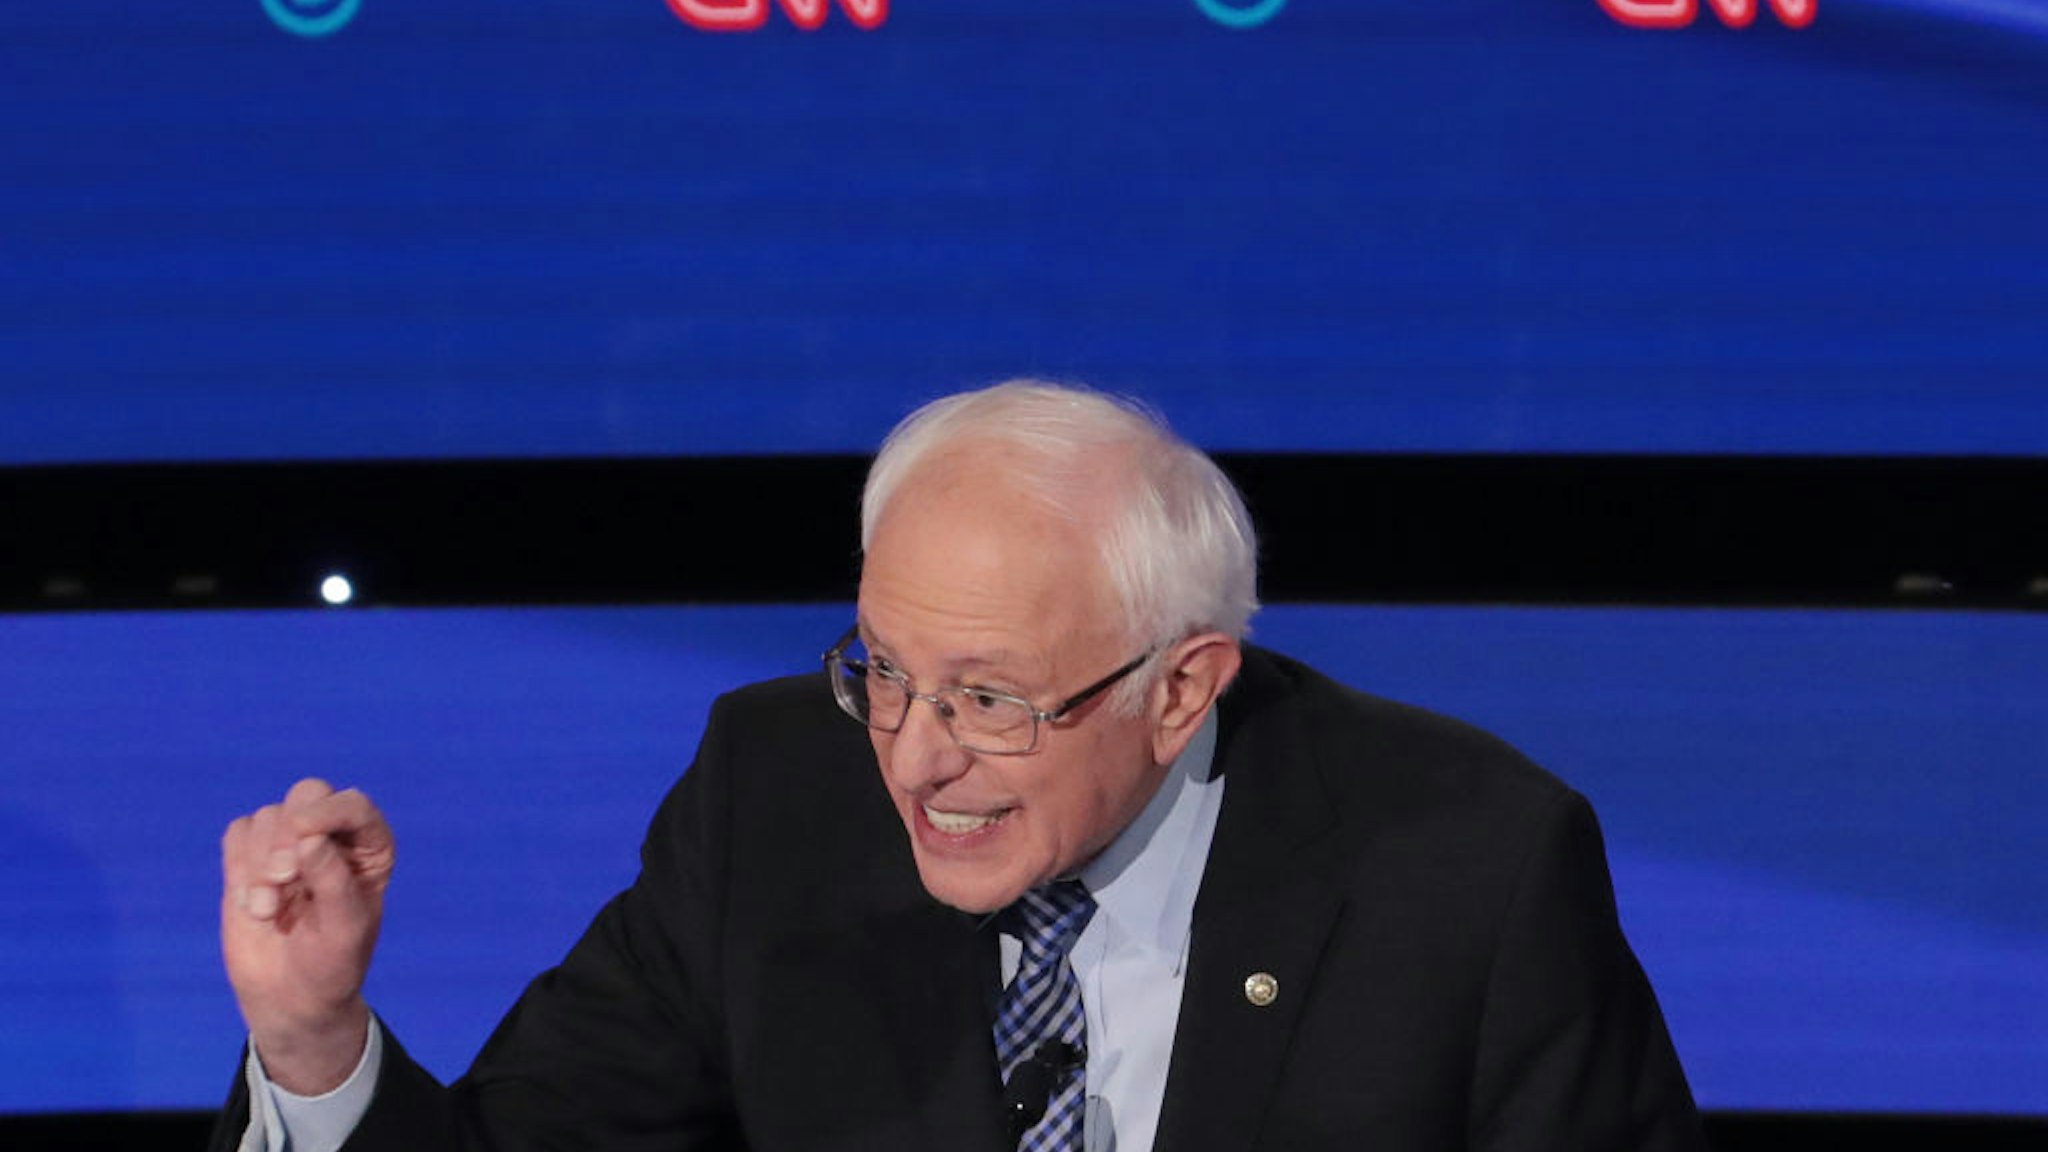 Sen. Bernie Sanders (I-VT) makes a point during the Democratic presidential primary debate at Drake University on January 14, 2020 in Des Moines, Iowa.